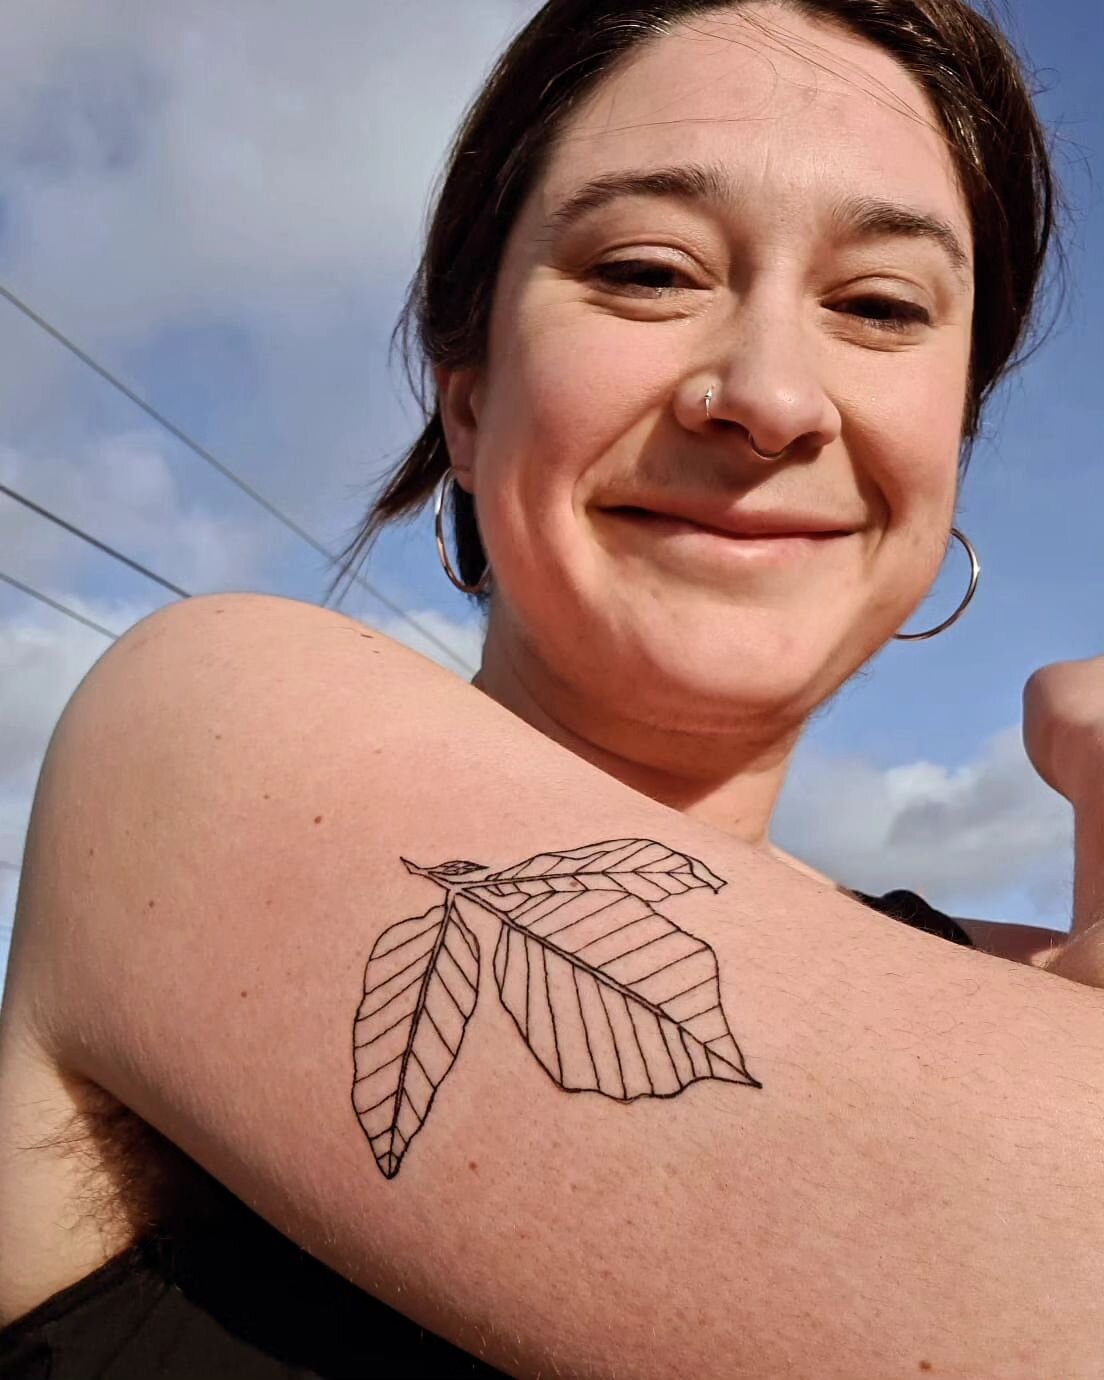 I was up in Glasgow this weekend doing a wee guest spot. These are 2 of 3 beech leaf tattoos which are for a group of friends who have known each other for 30+years! An honour to be asked to design and tattoo these for them. #bristoltattoo #glasgowta